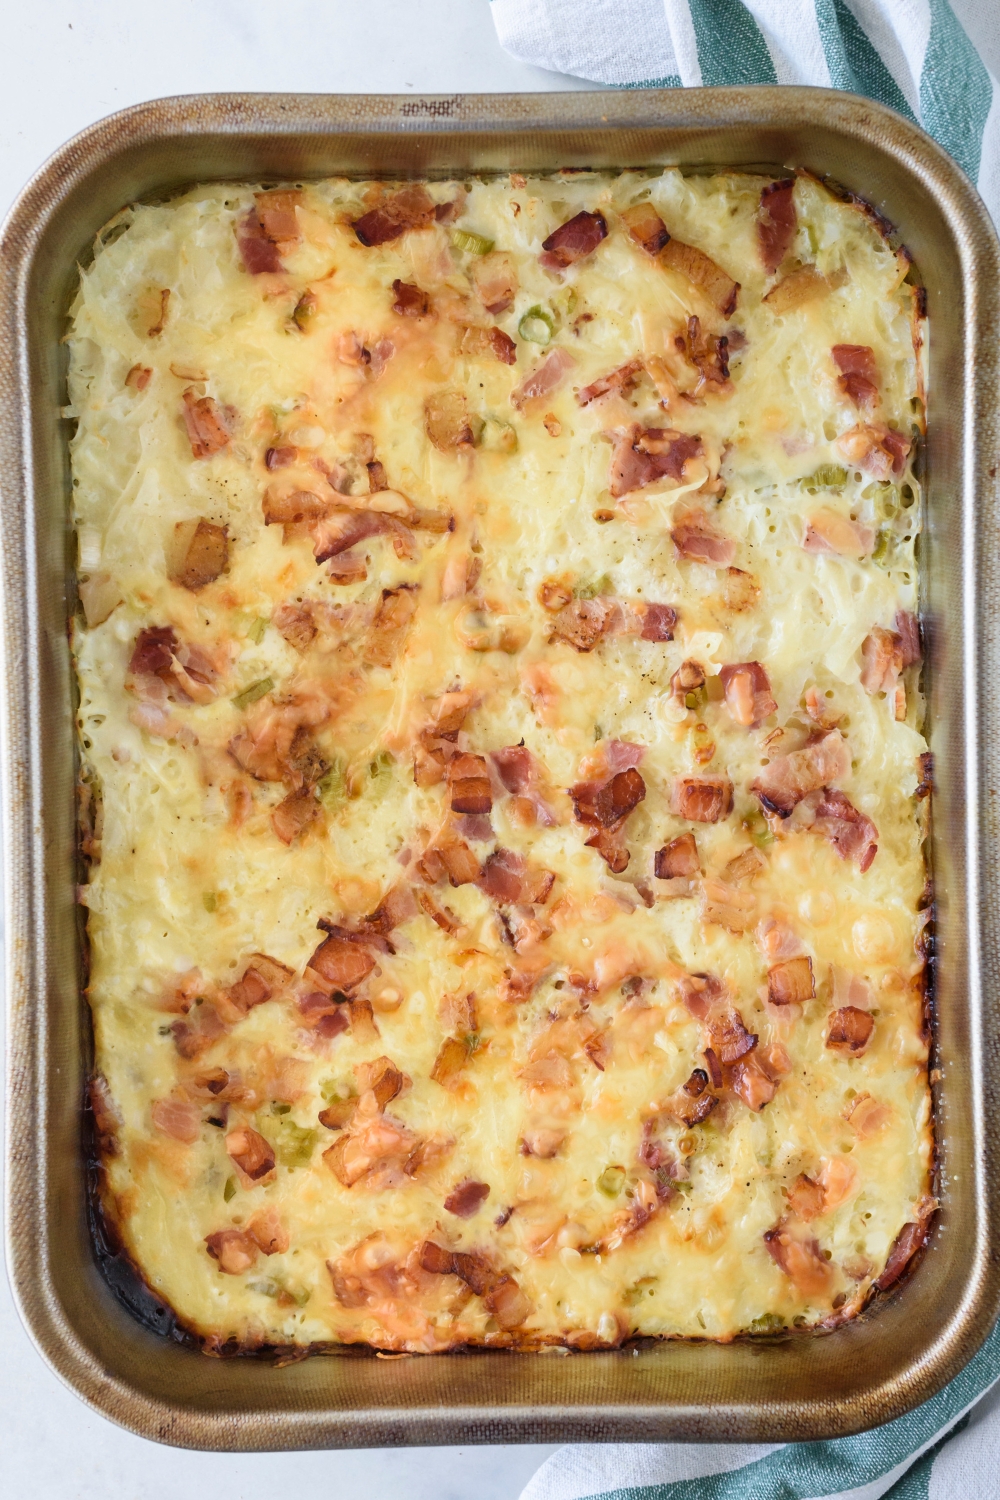 A casserole dish with baked farmers casserole.